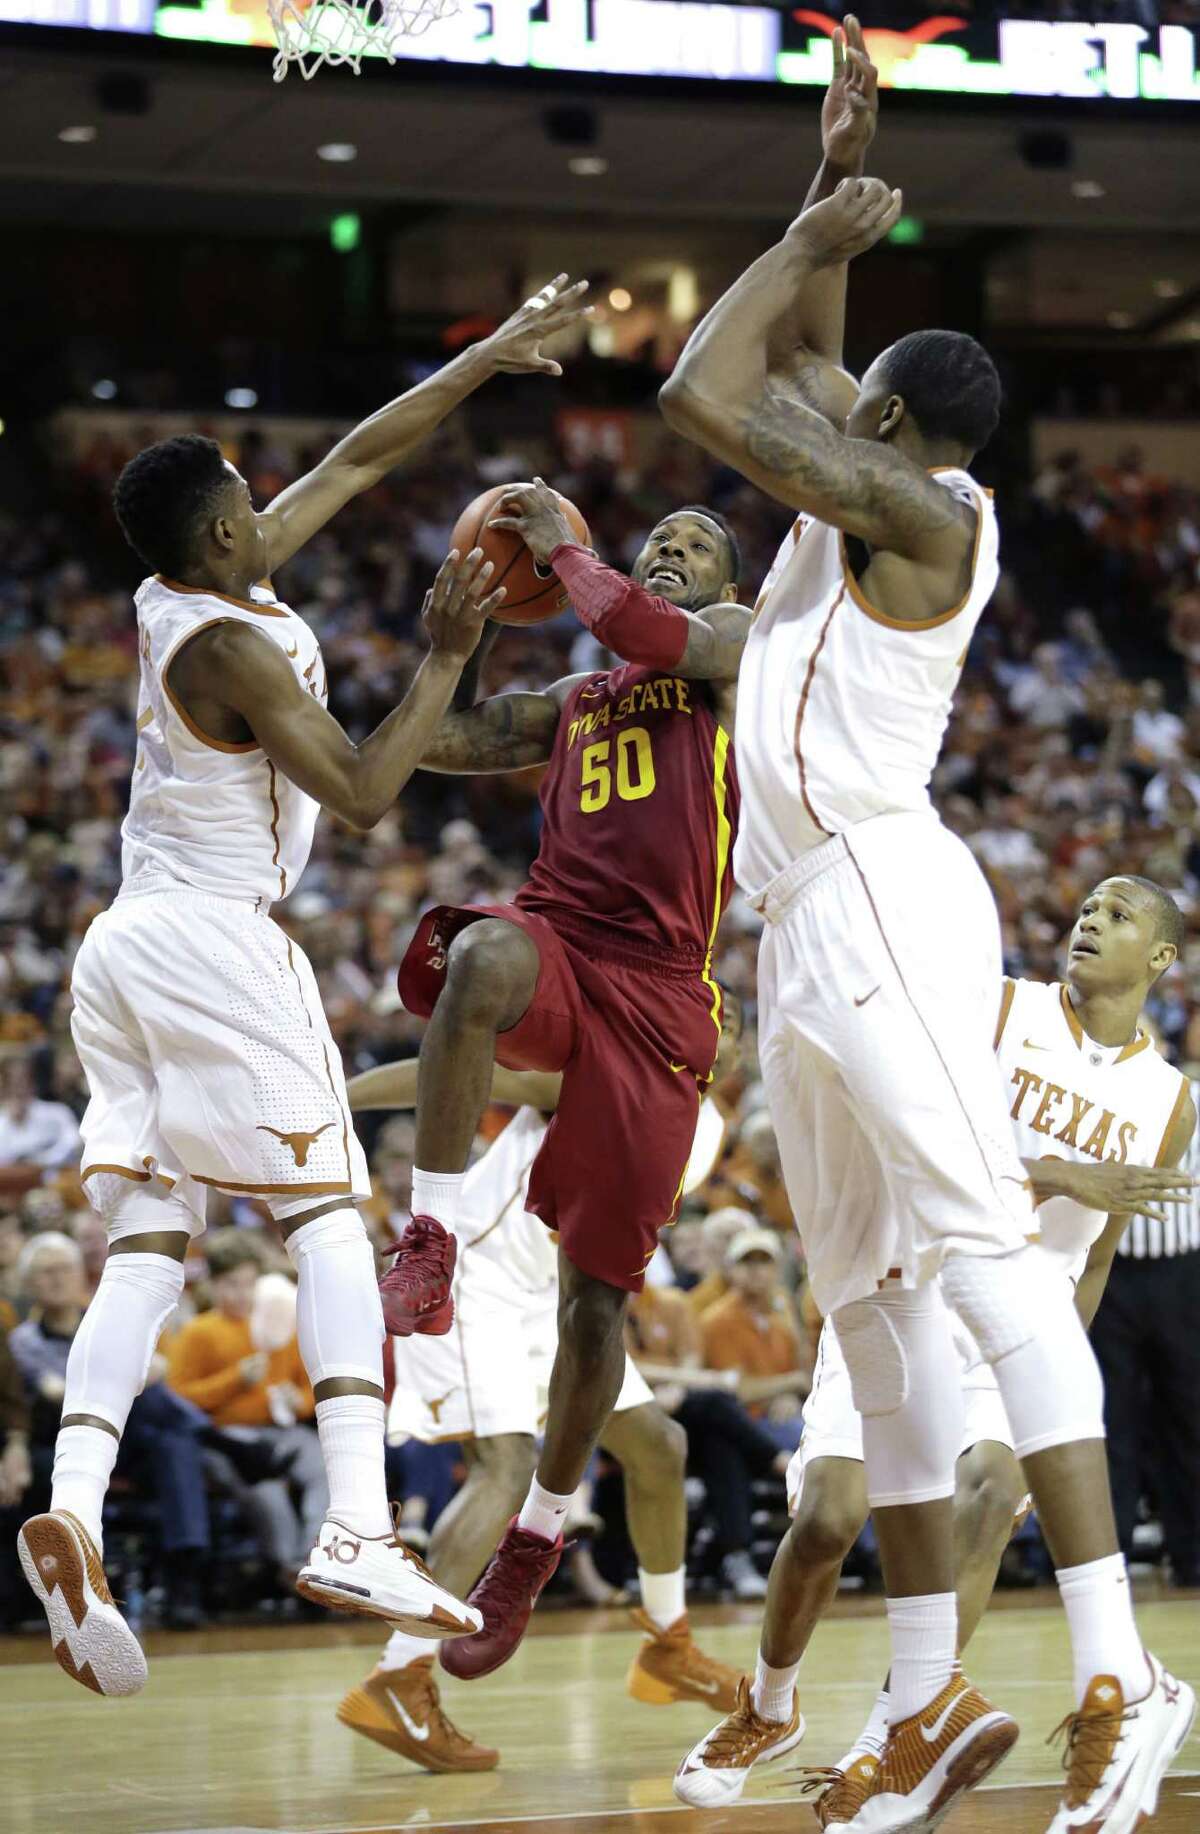 Iowa State's DeAndre Kane (50) drives to the basket between Texas defenders Isaiah Taylor, left, and Prince Ibeh, right, during the second half on an NCAA college basketball game, Saturday, Jan. 18, 2014, in Austin, Texas. Texas won 86-76. (AP Photo/Eric Gay)